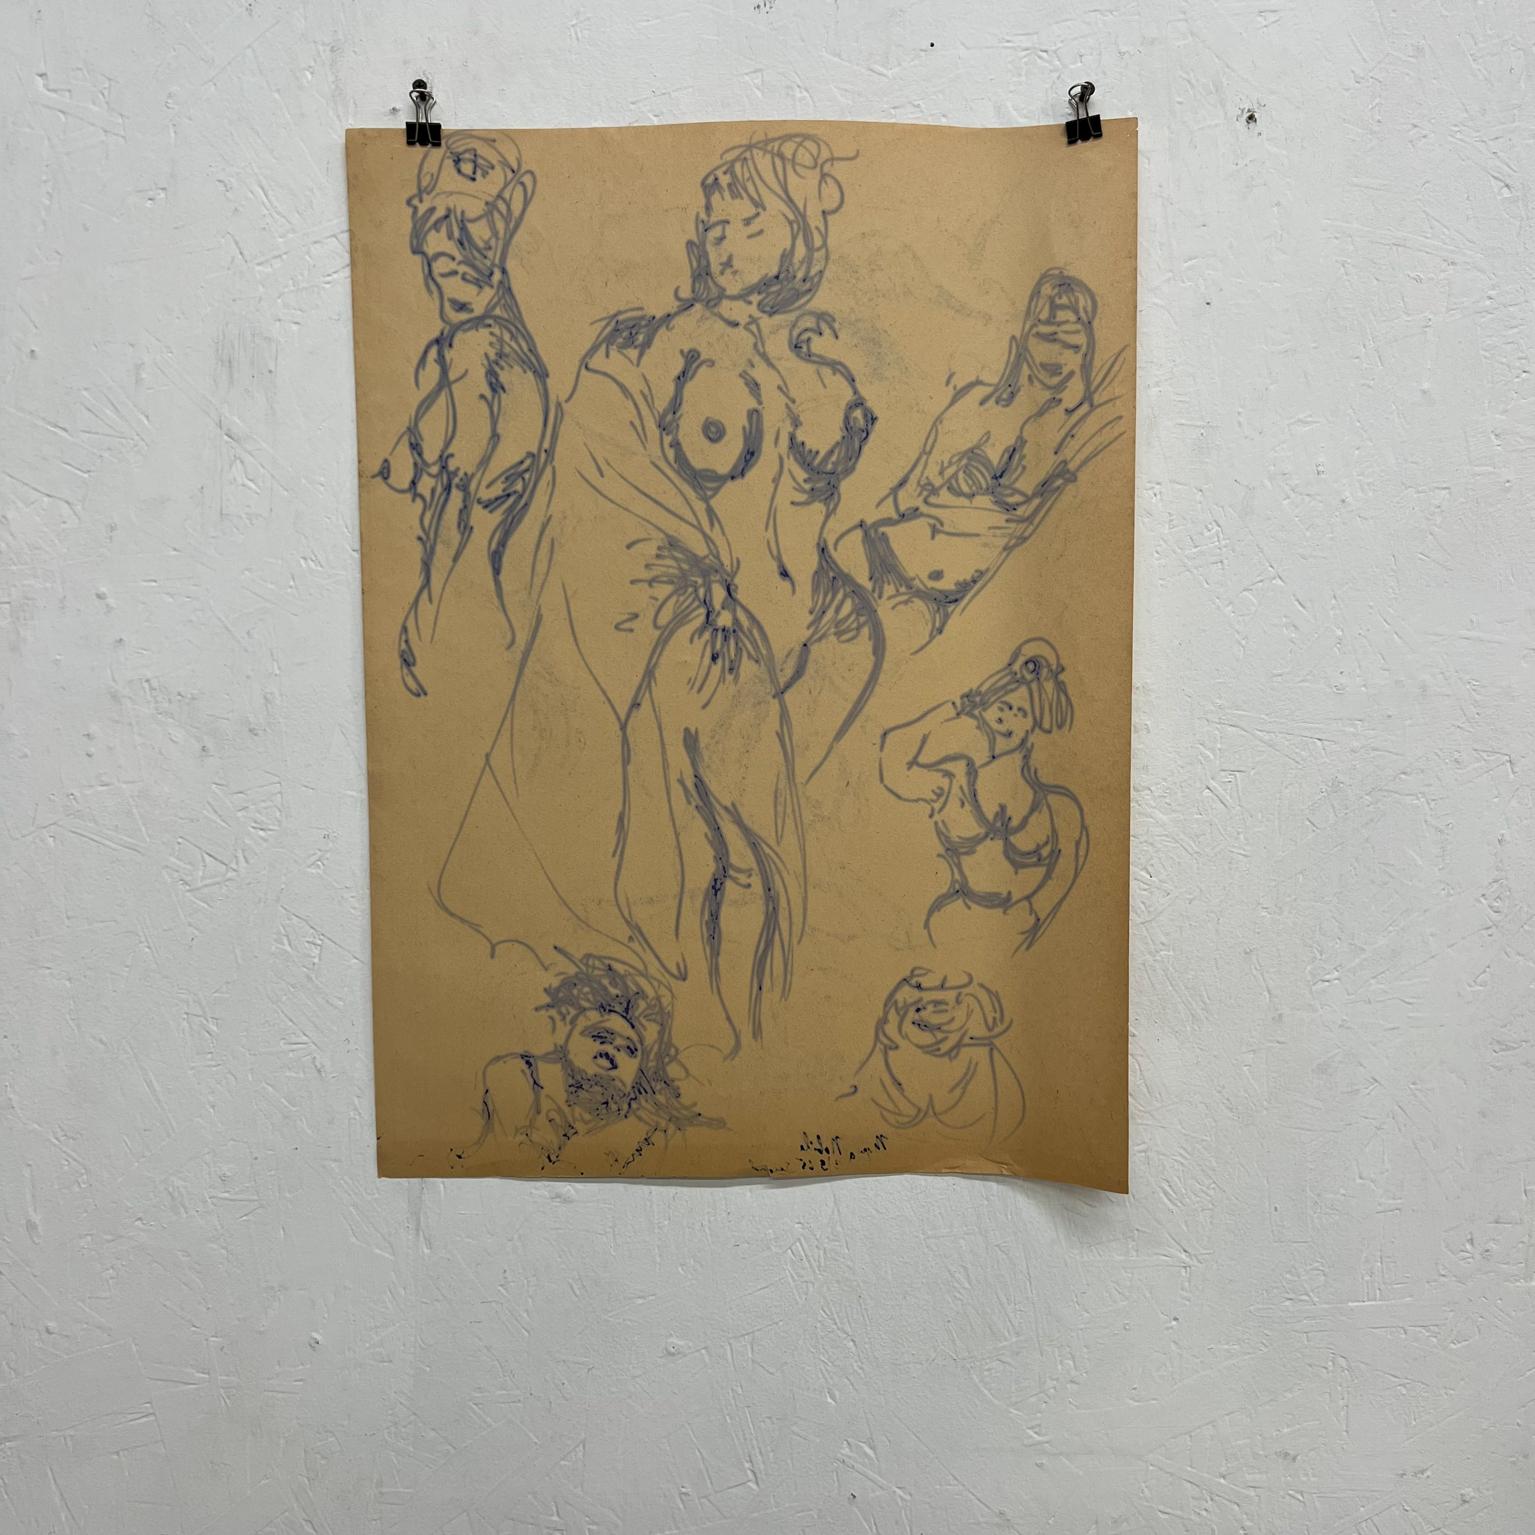 Myrna Nobile Nude Art Paper Drawing #1 Signed 3/5/65 San Diego CA For Sale 1